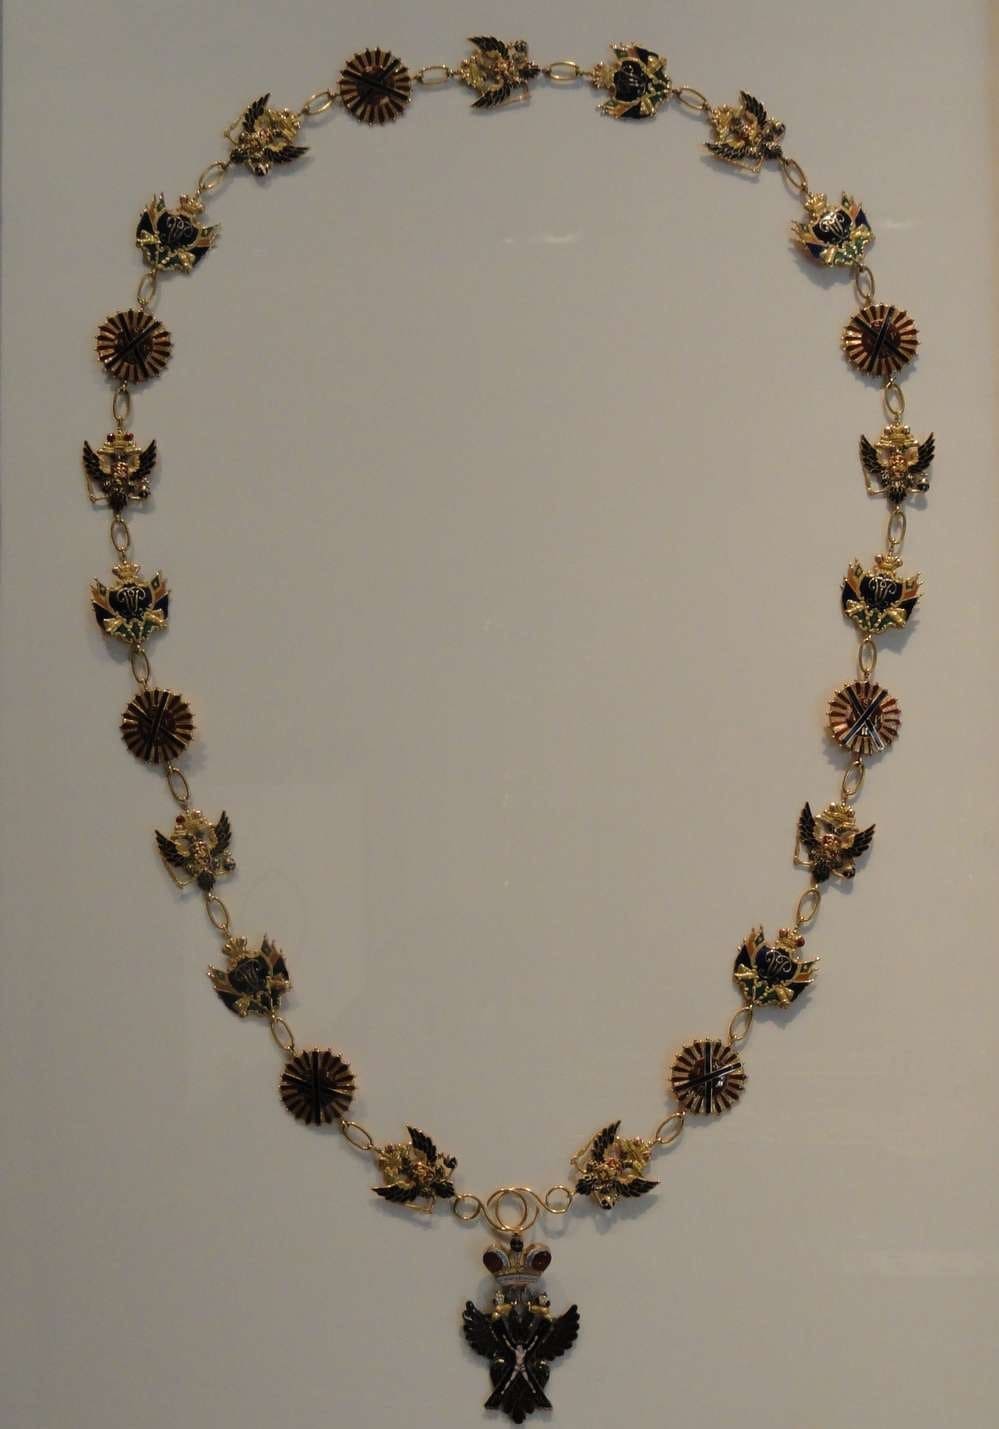 Collar of the Order of Saint Andrew from the collection of Musée de la Légion d'honneur.jpg